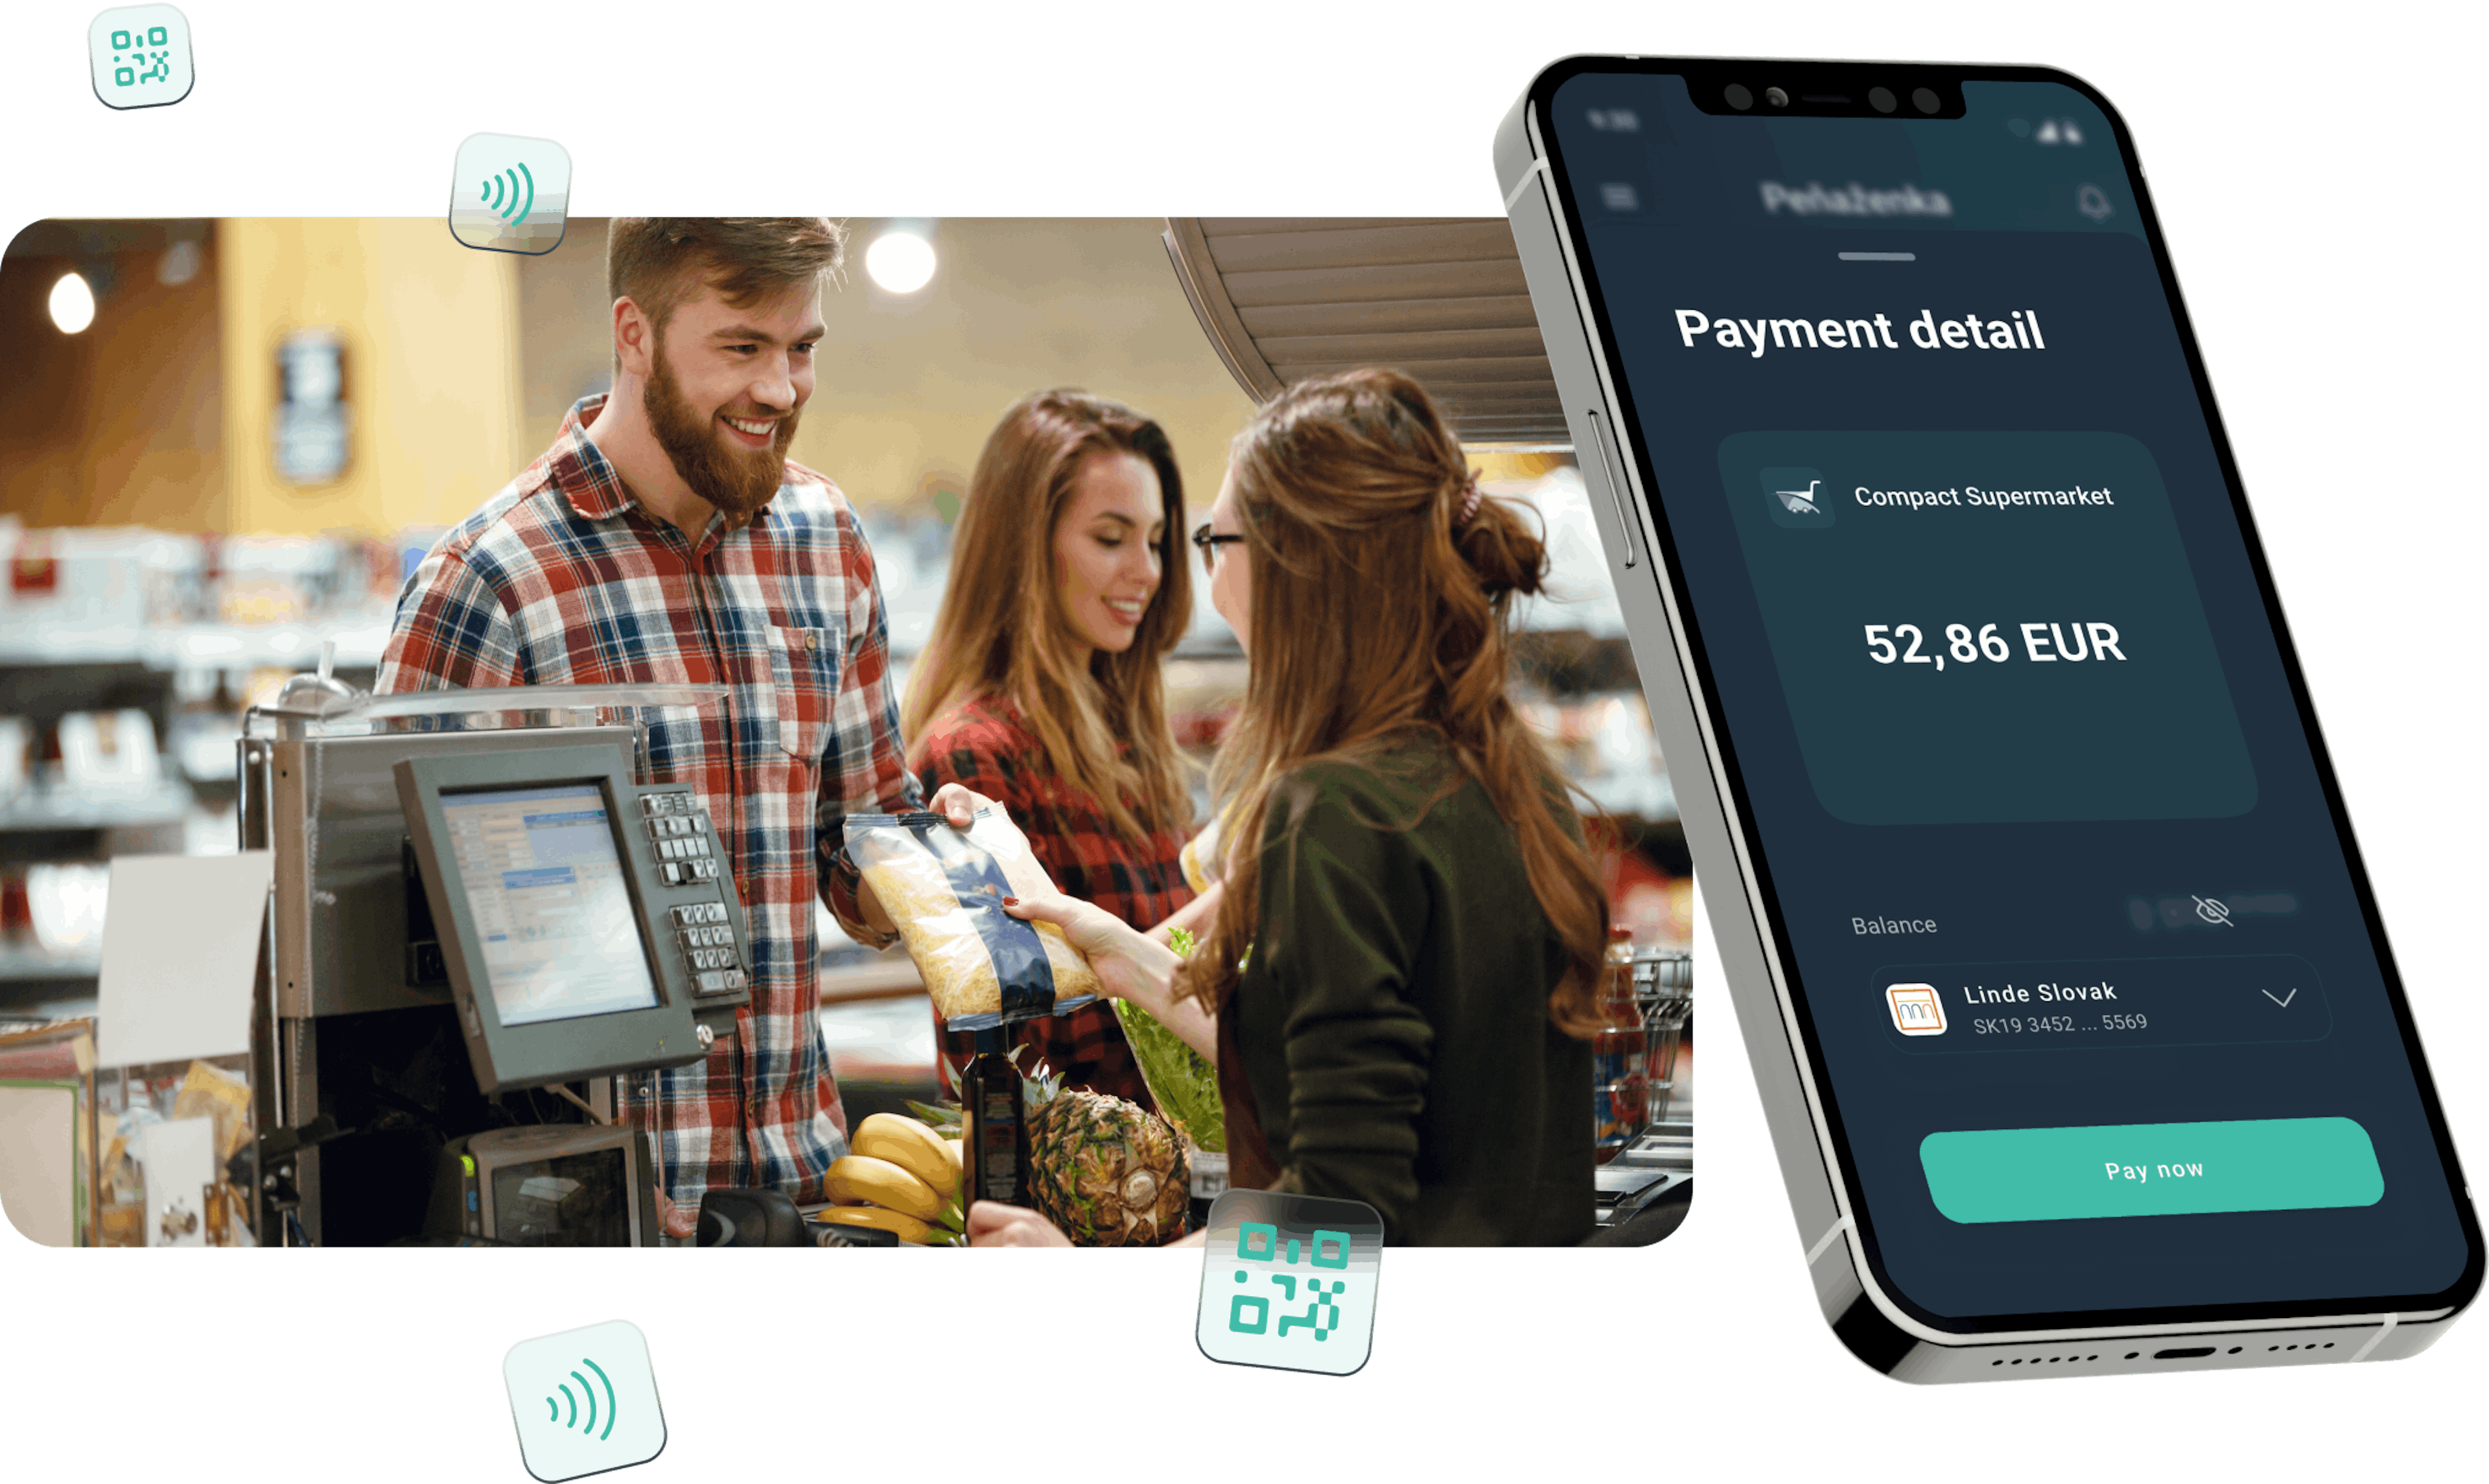 Payment detail